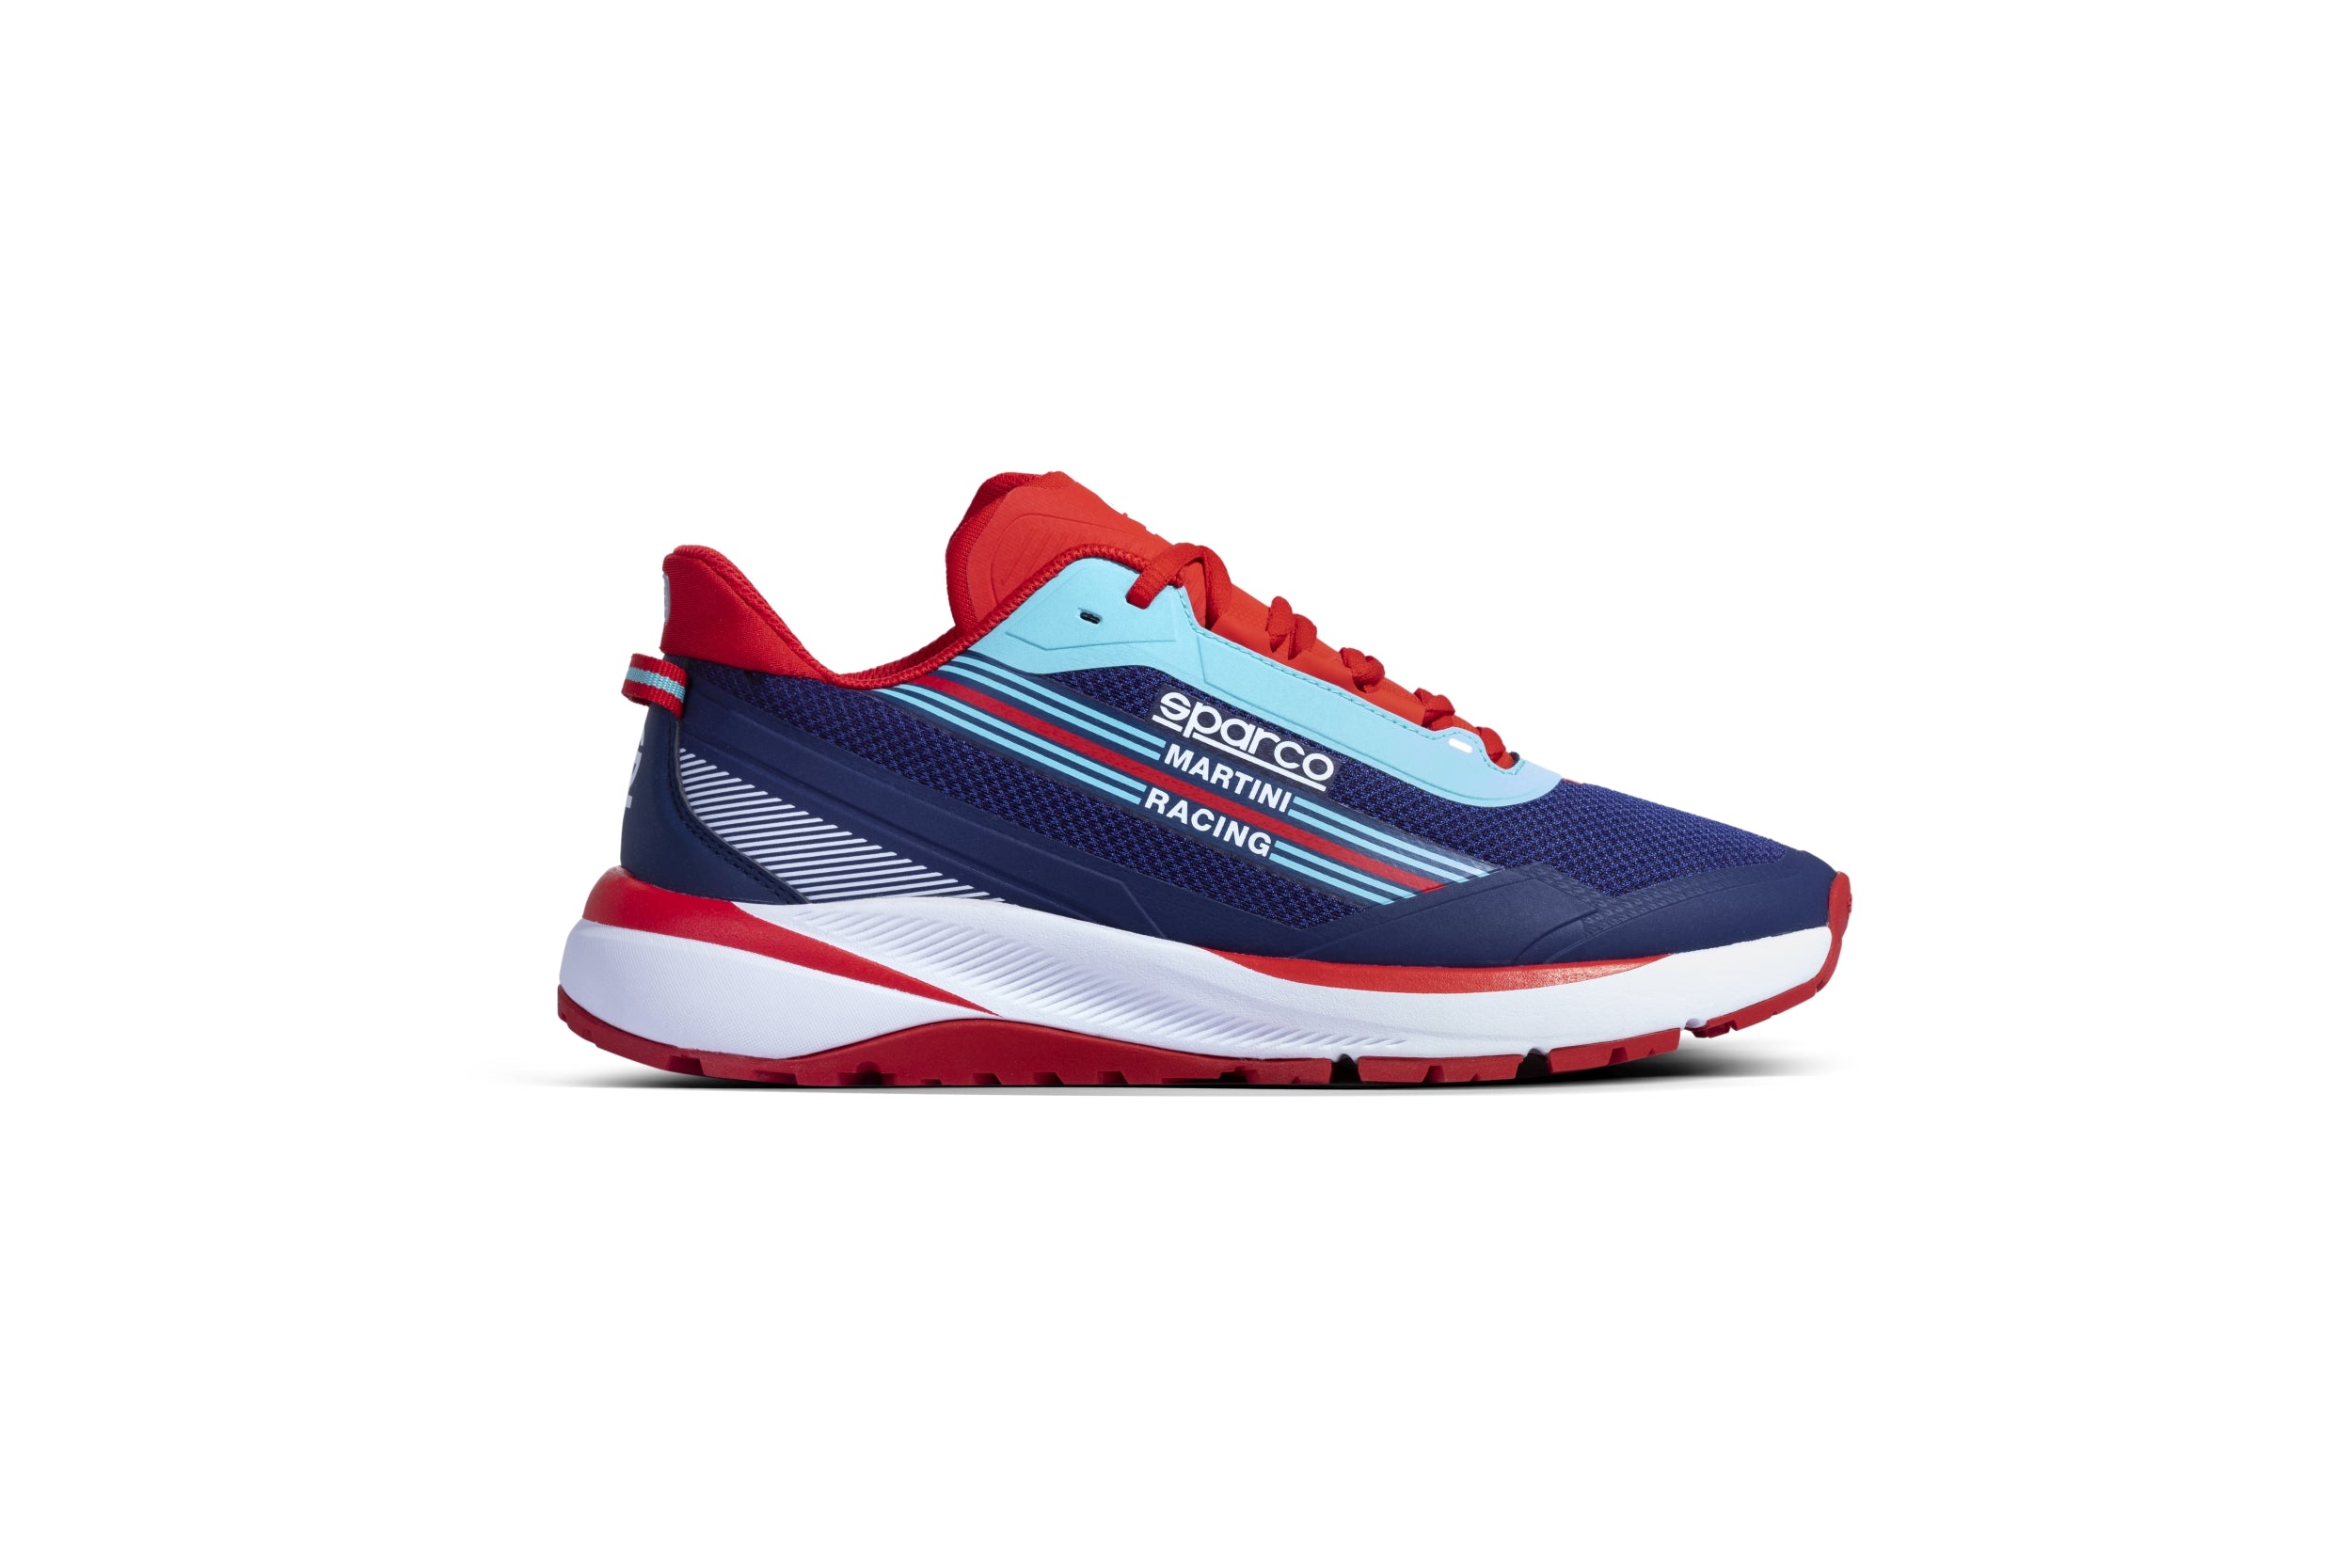 SPARCO 0012A5MR38BM S-RUN MARTINI RACING Sneakers Shoes, navy blue, size 38 Photo-2 